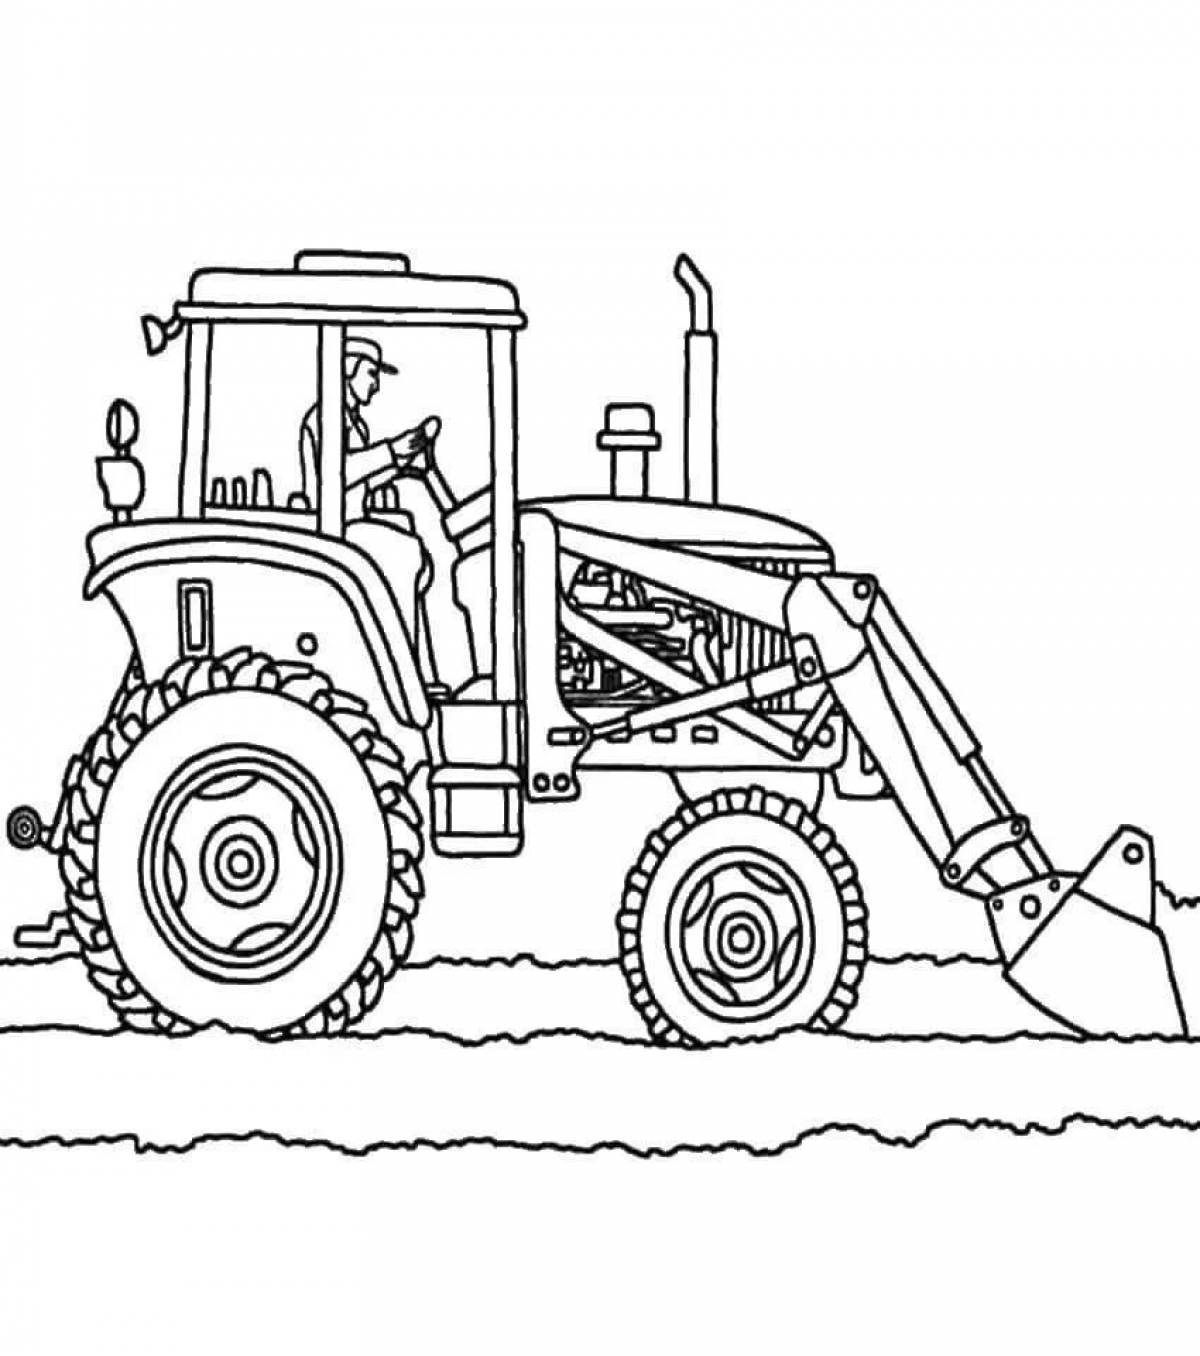 Tractor drawing #4